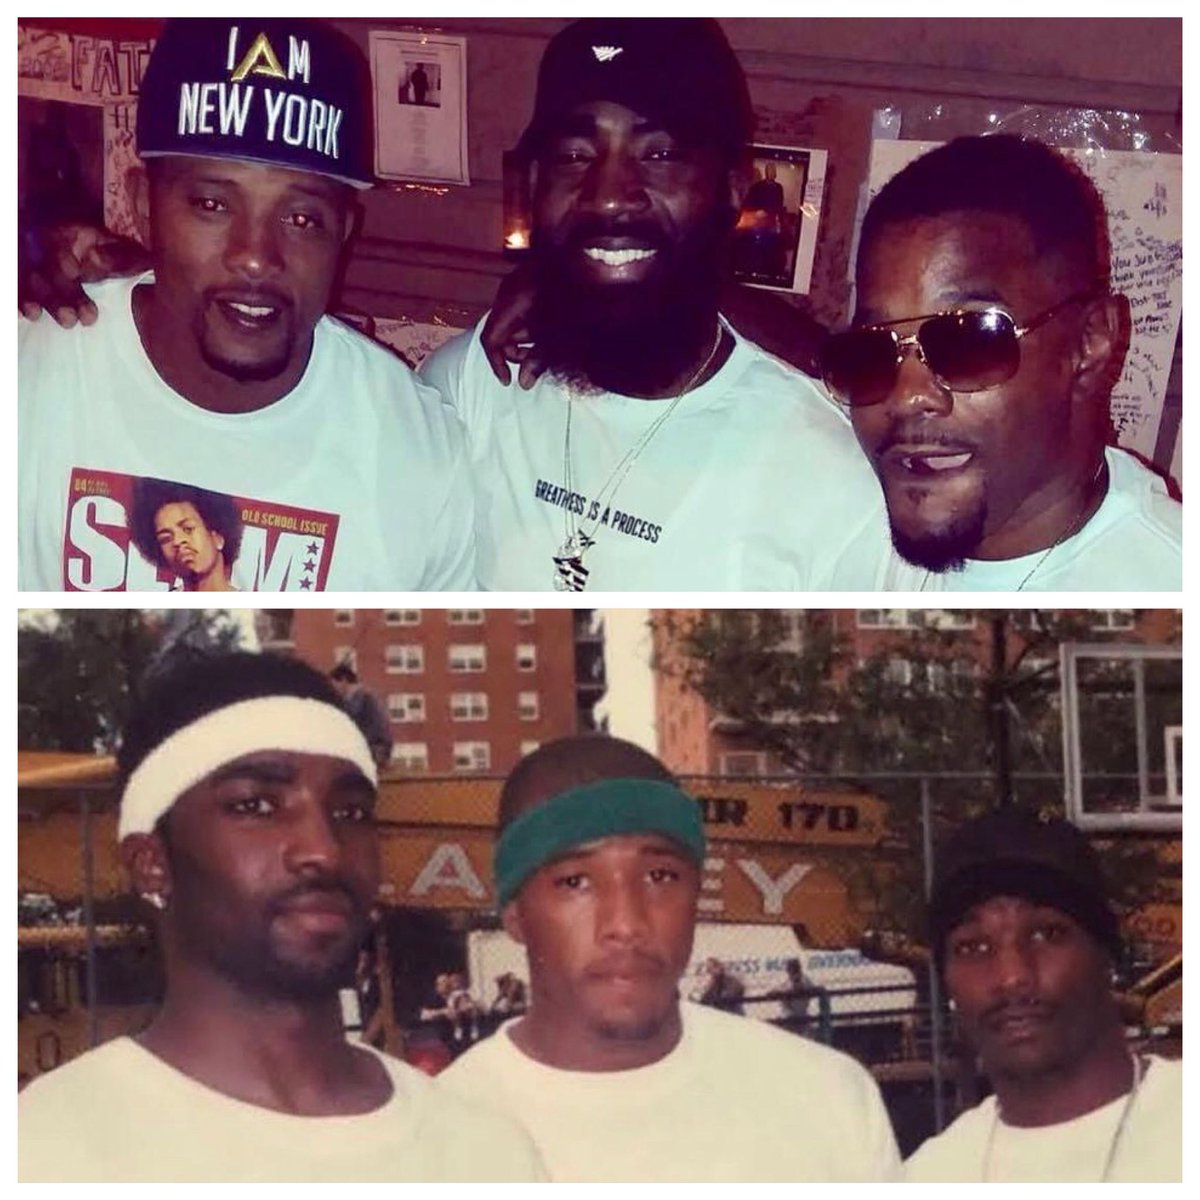 “Our Minds Has Always Been Are Weapons, We Keep Them Loaded” I learned a lot from these 2 LEGENDS ON & OFF THE COURT. I APPRECIATE YALL🤫🗽🏀💪🏾🙌🏾🙏🏾✊🏾💯🤝🏁 @therealshammgod #KareemReid #NYCPointGods #Legendary #StreetsFirst #KnowYourHistory #Basketball #Streetball #NBA